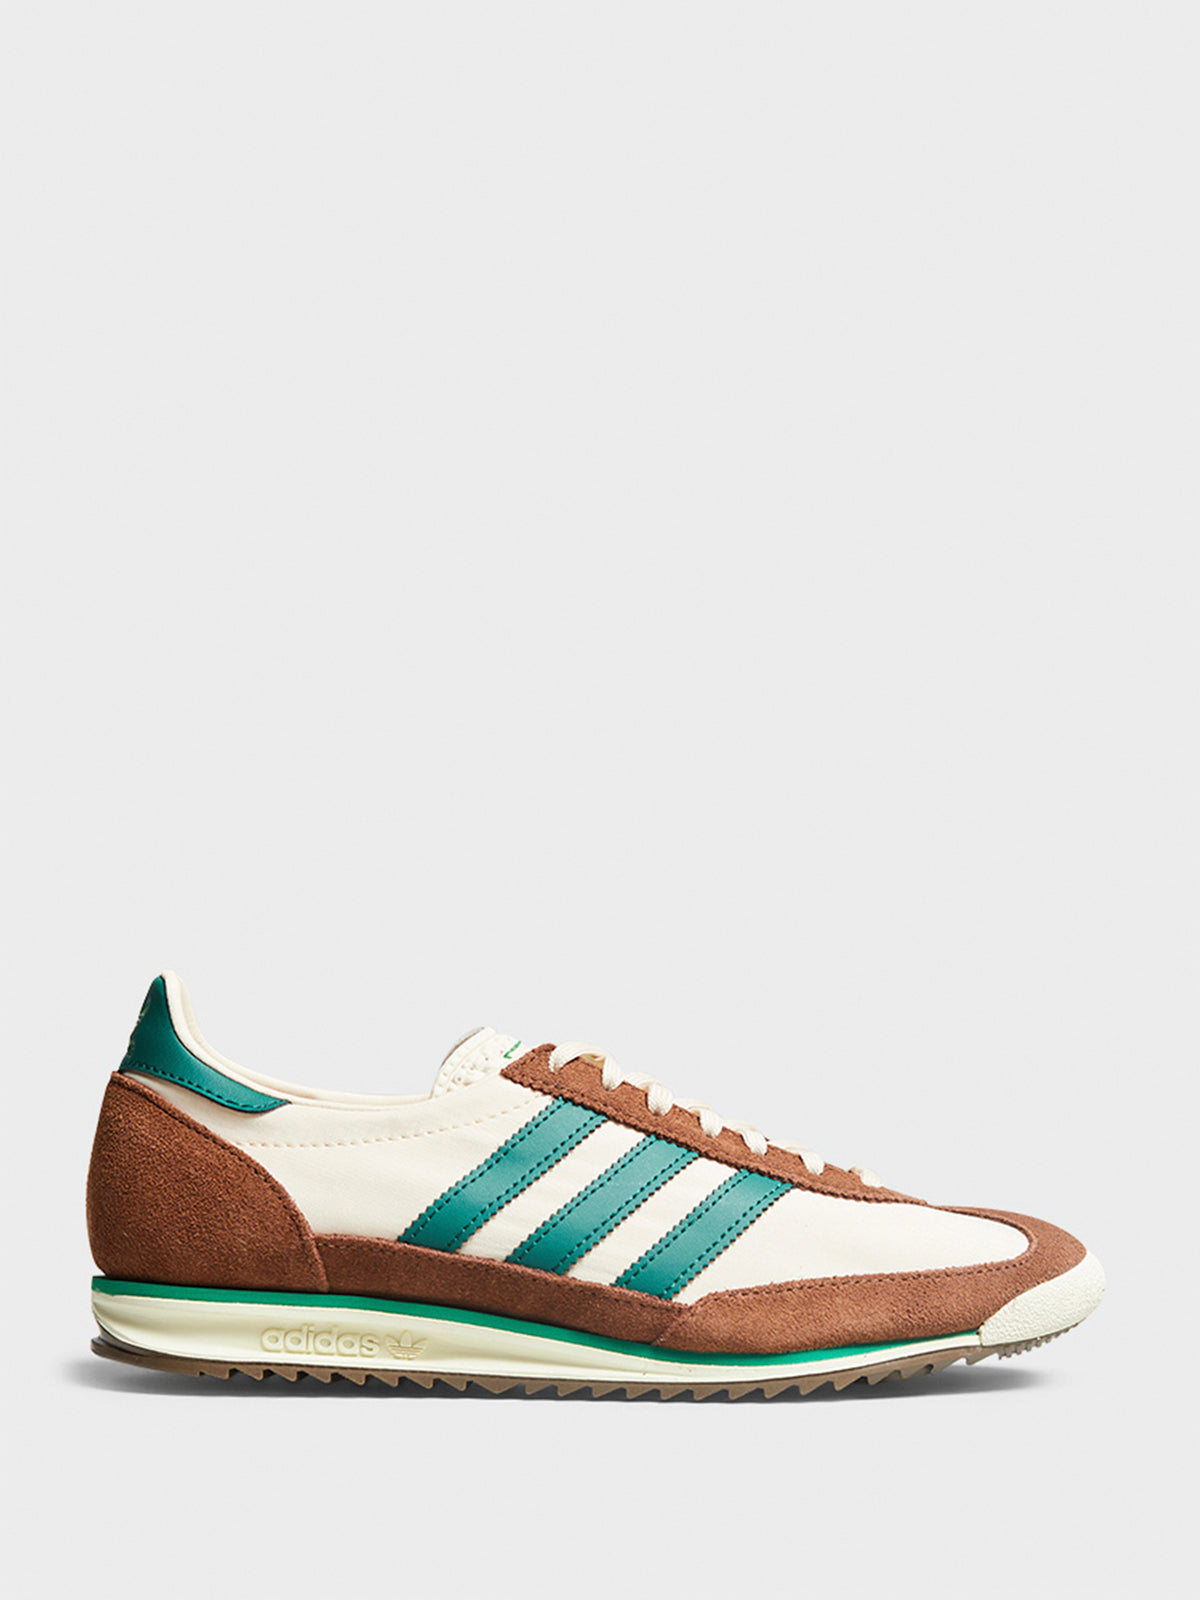 SL72 OG W Sneakers in White, Green and Brown